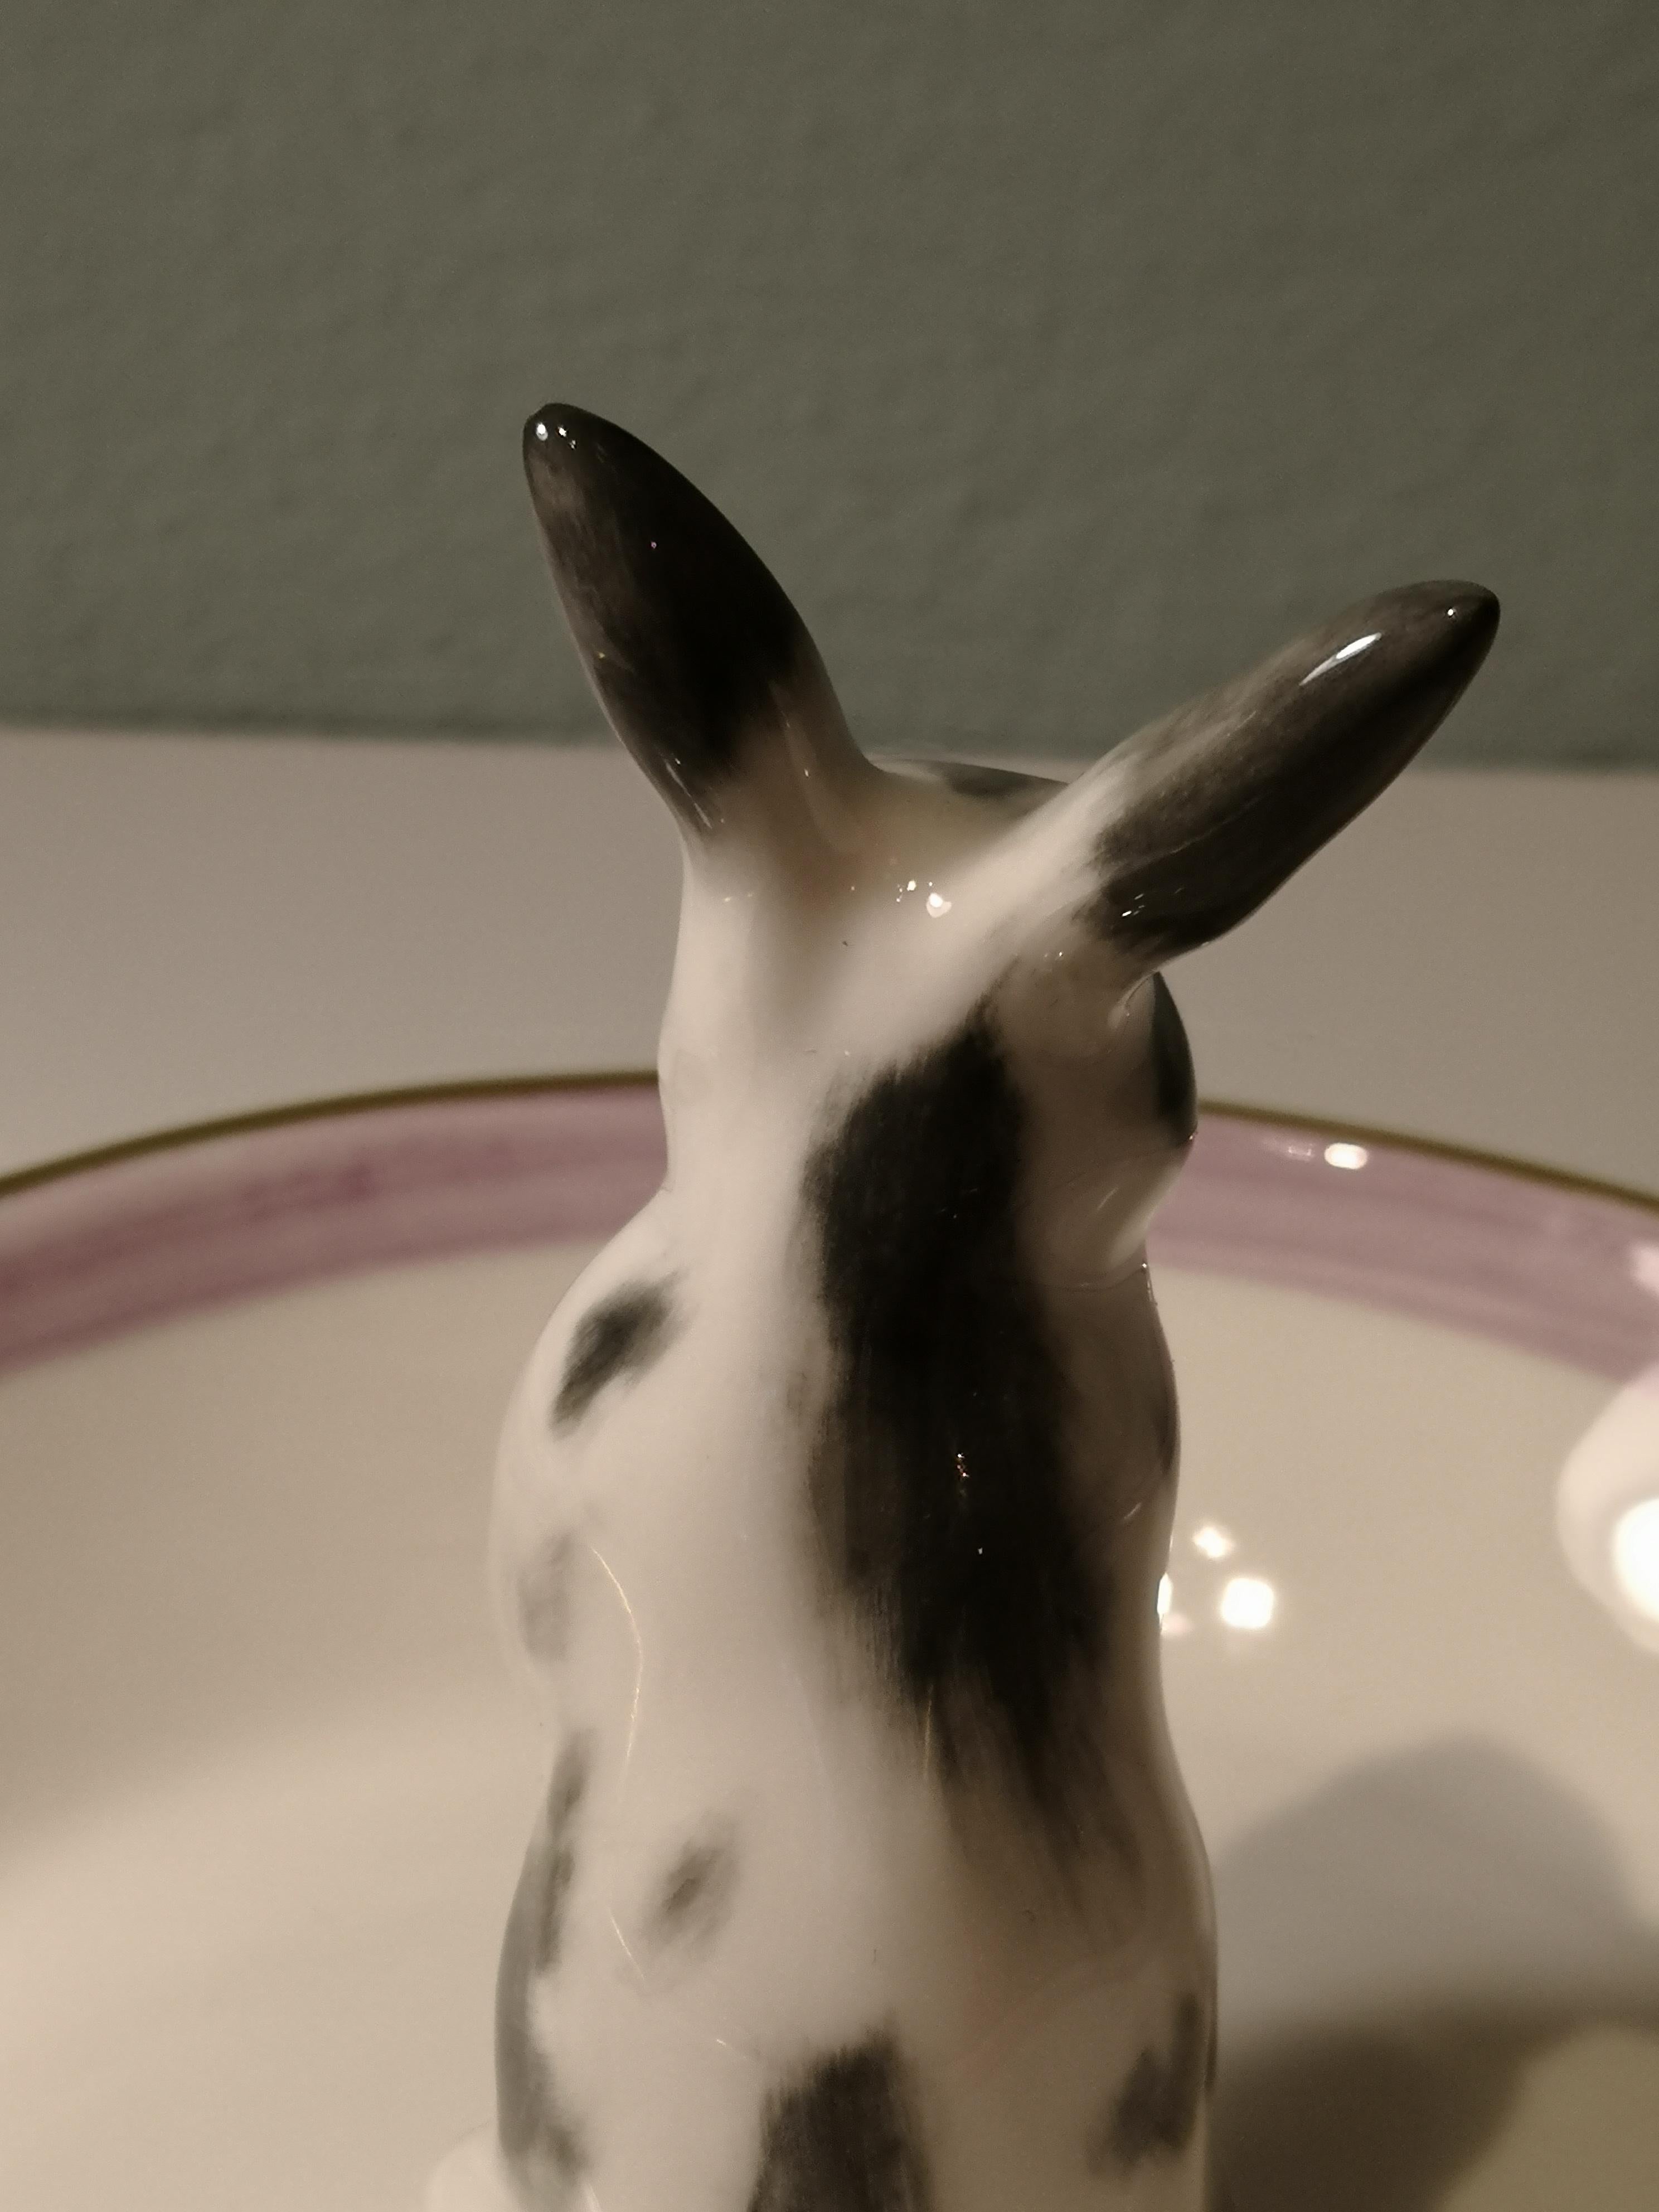 Completely handmade porcelain bowl with a hands-free naturalistic painted bunny figure with grey spots in country style. The bunny is sitting in the middle of the bowl for decorating nuts or sweets around. Rimmed with a pink and 24-carat gold line.